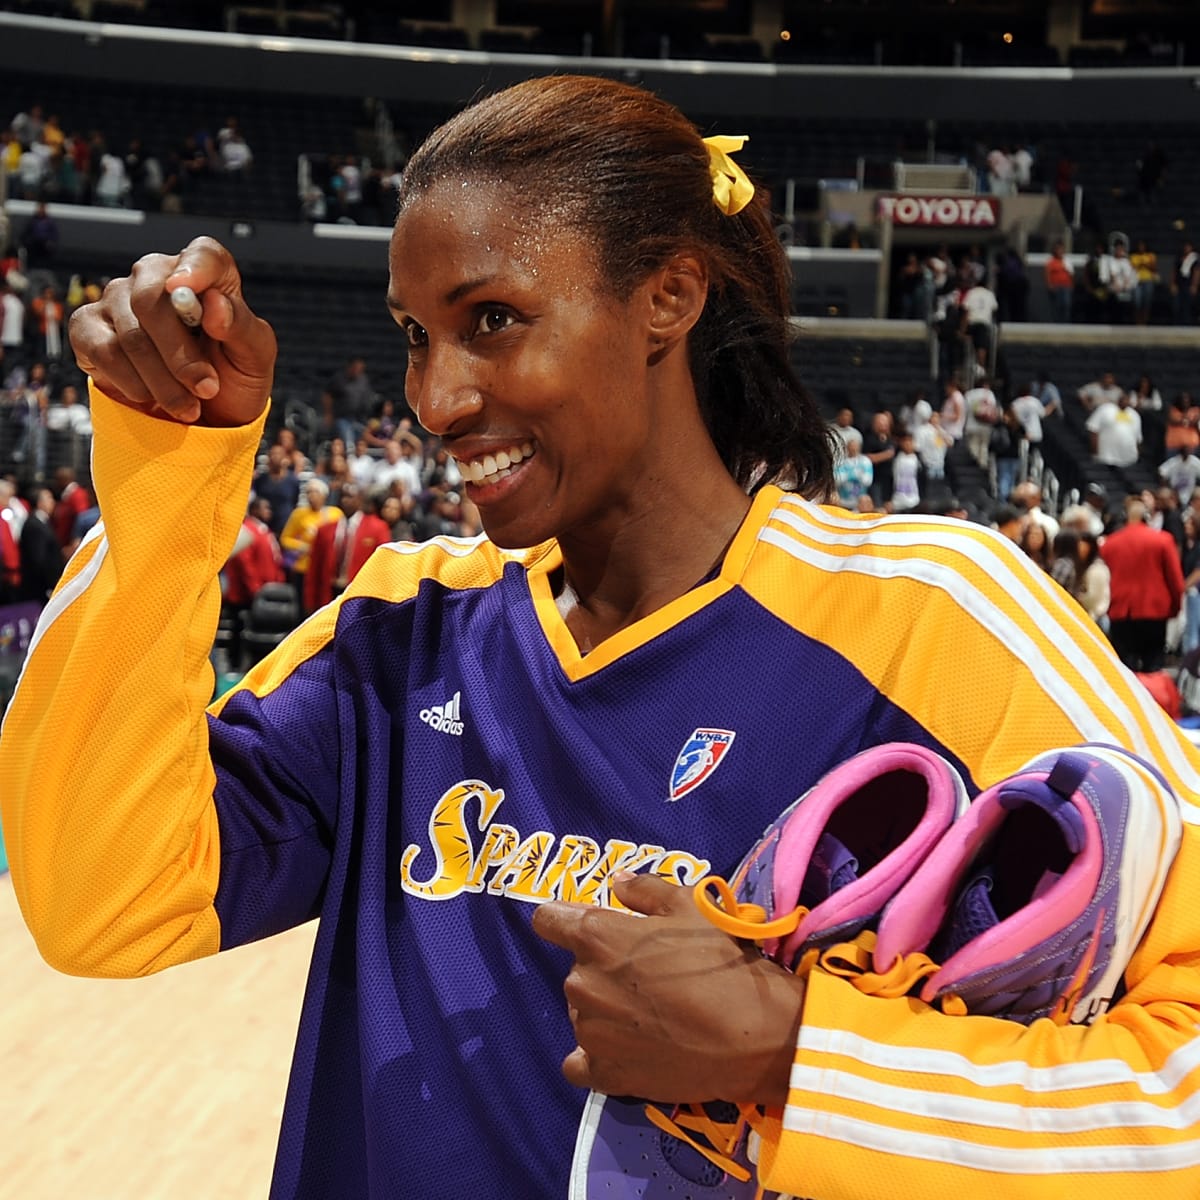 Sue Favor: Lisa Leslie continues to surpass expectations of female athletes  as Sparks' part owner - Sports Illustrated